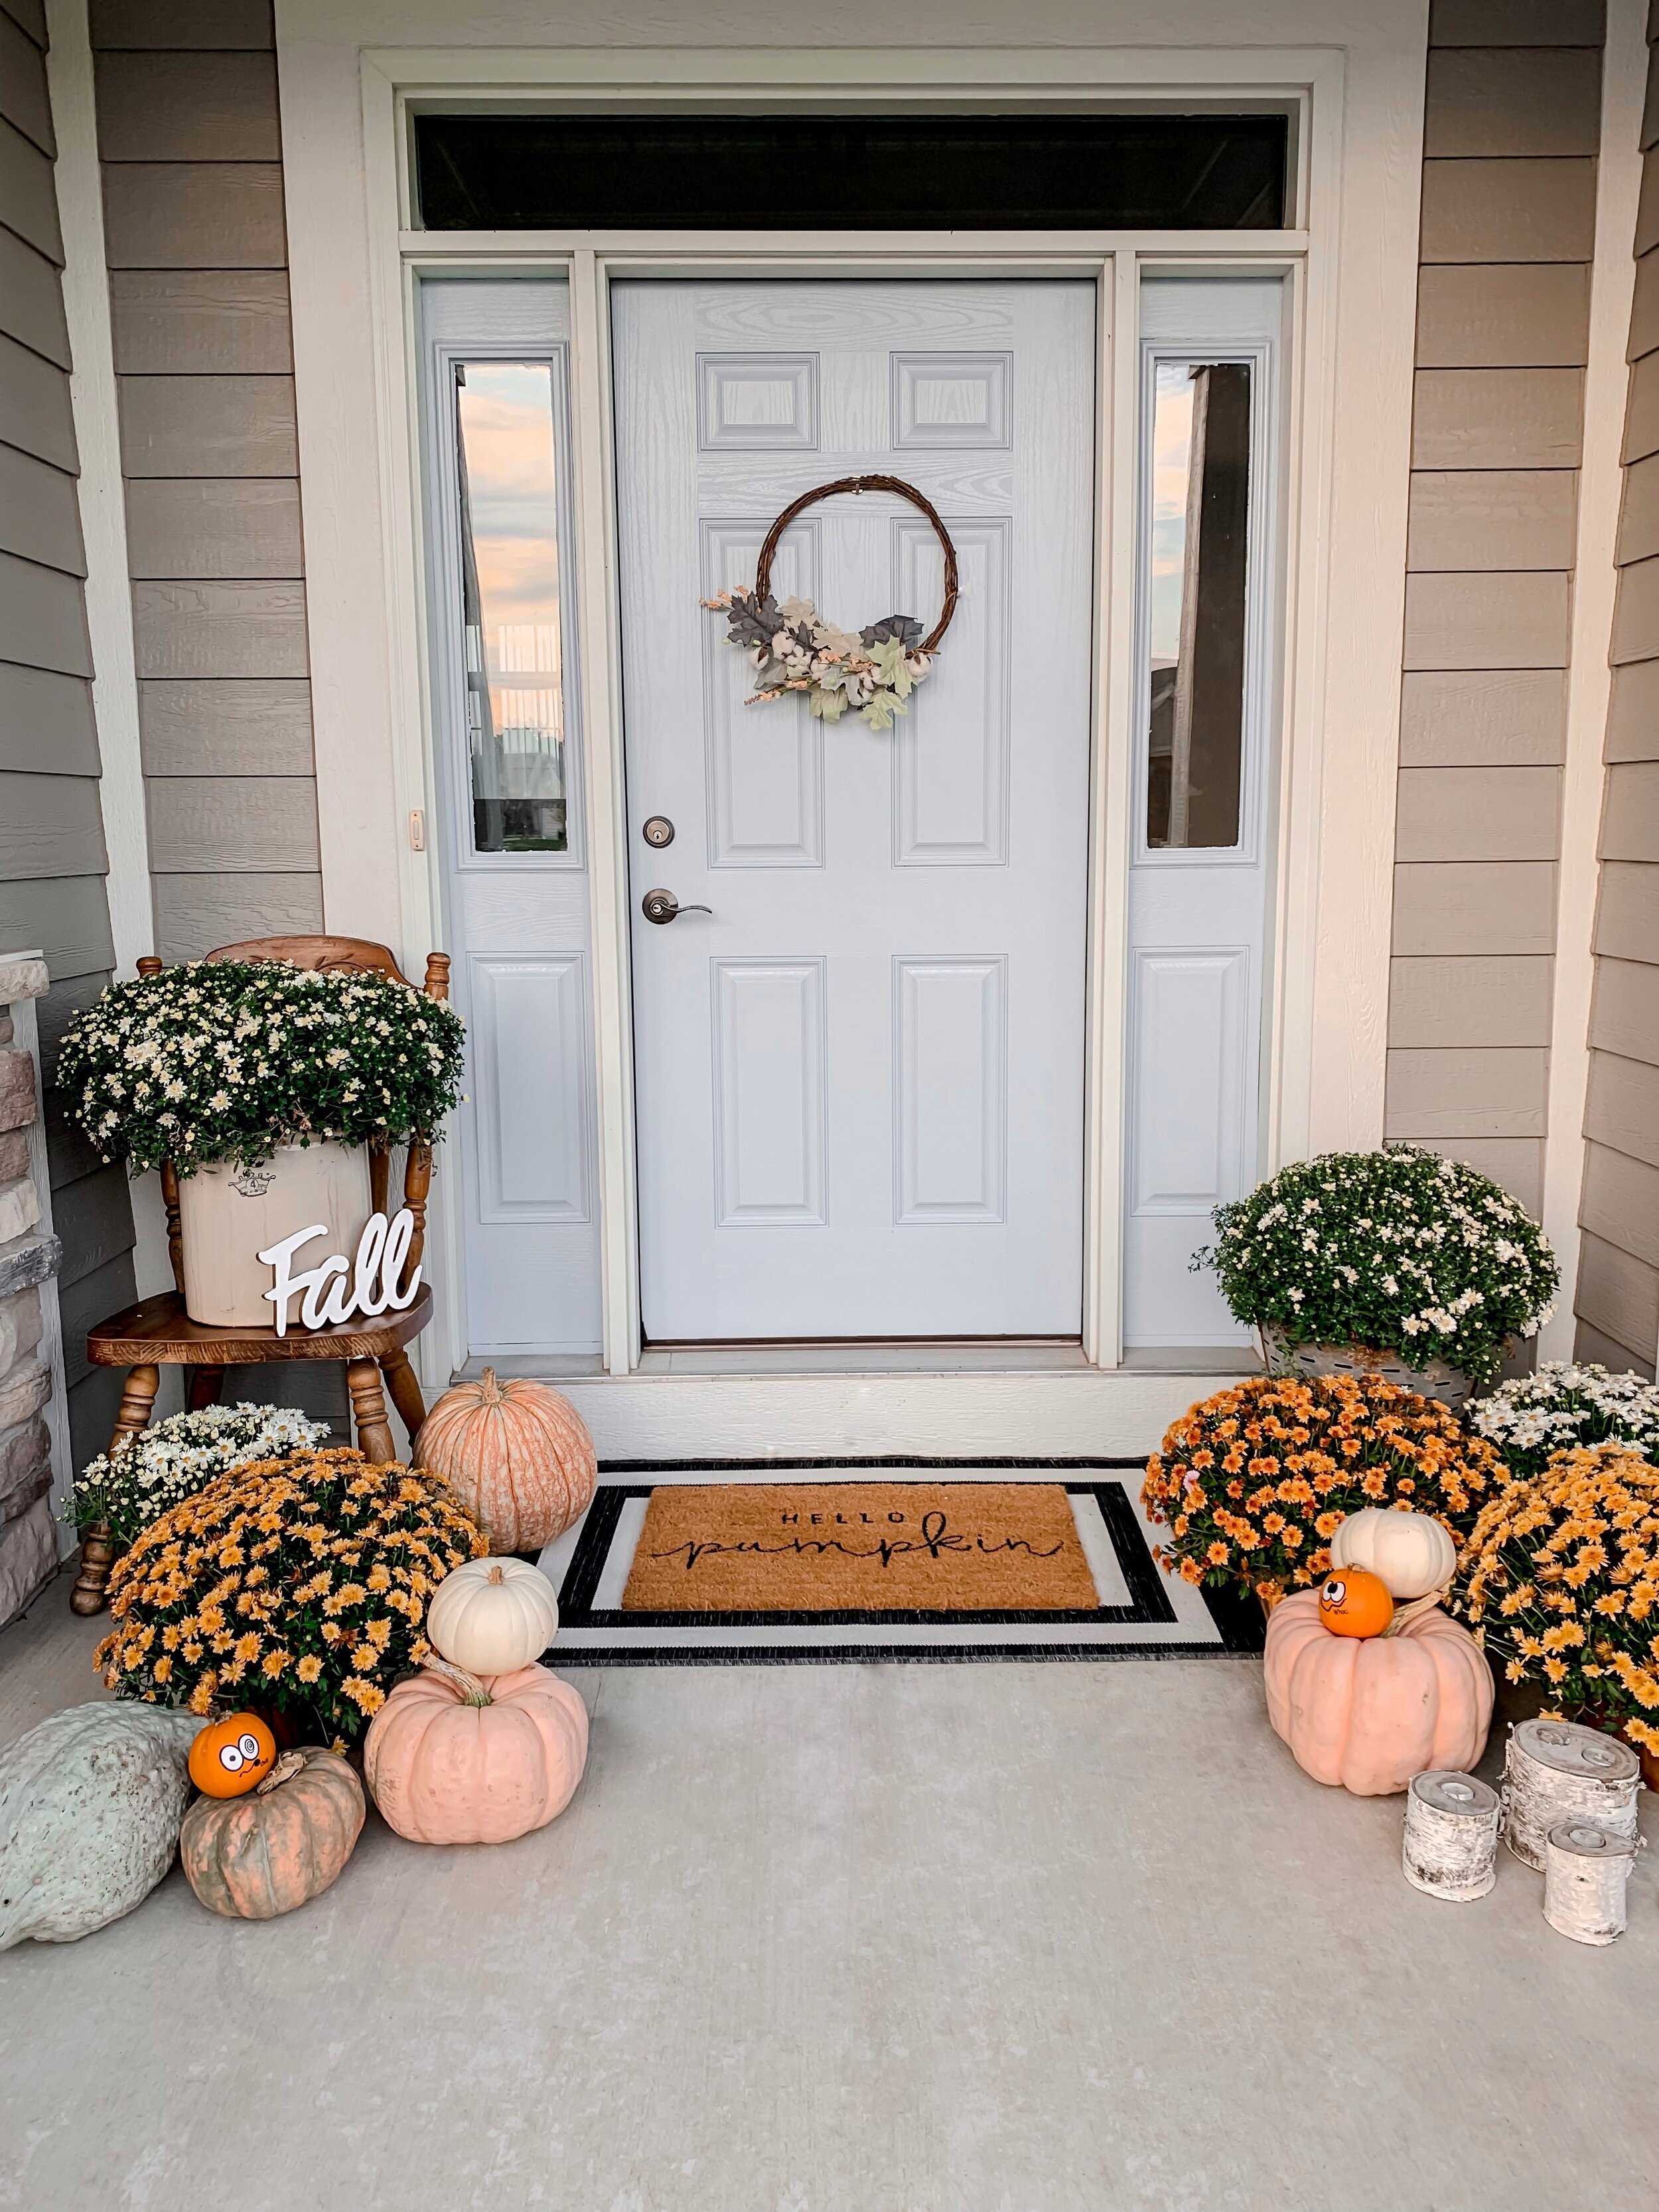 This amazing light blue front door inspiration is from my friend Tiffany at Farmulosity. https://www.farmulosity.com/blog/instant-diy-curb-appeal-on-a-budget